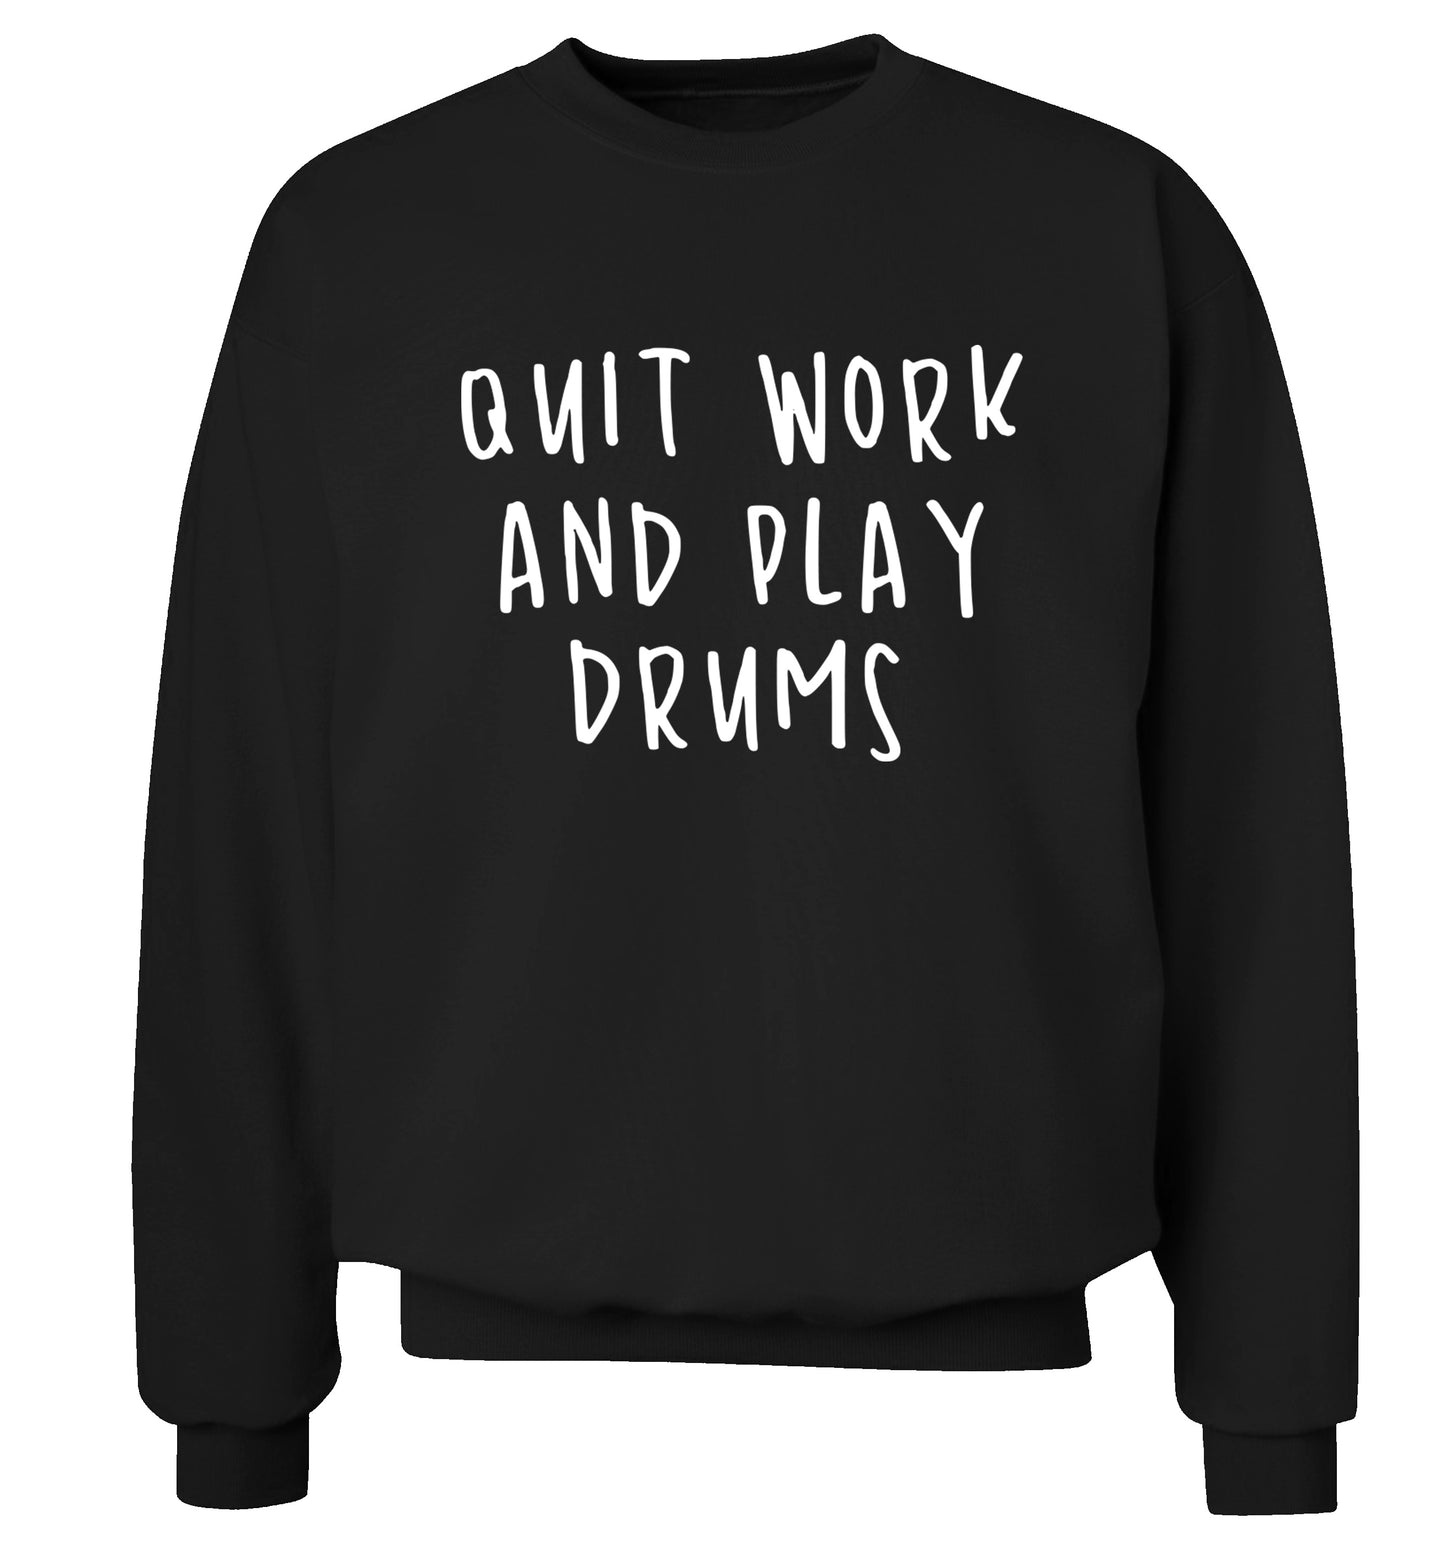 Quit work and play drums Adult's unisex black Sweater 2XL